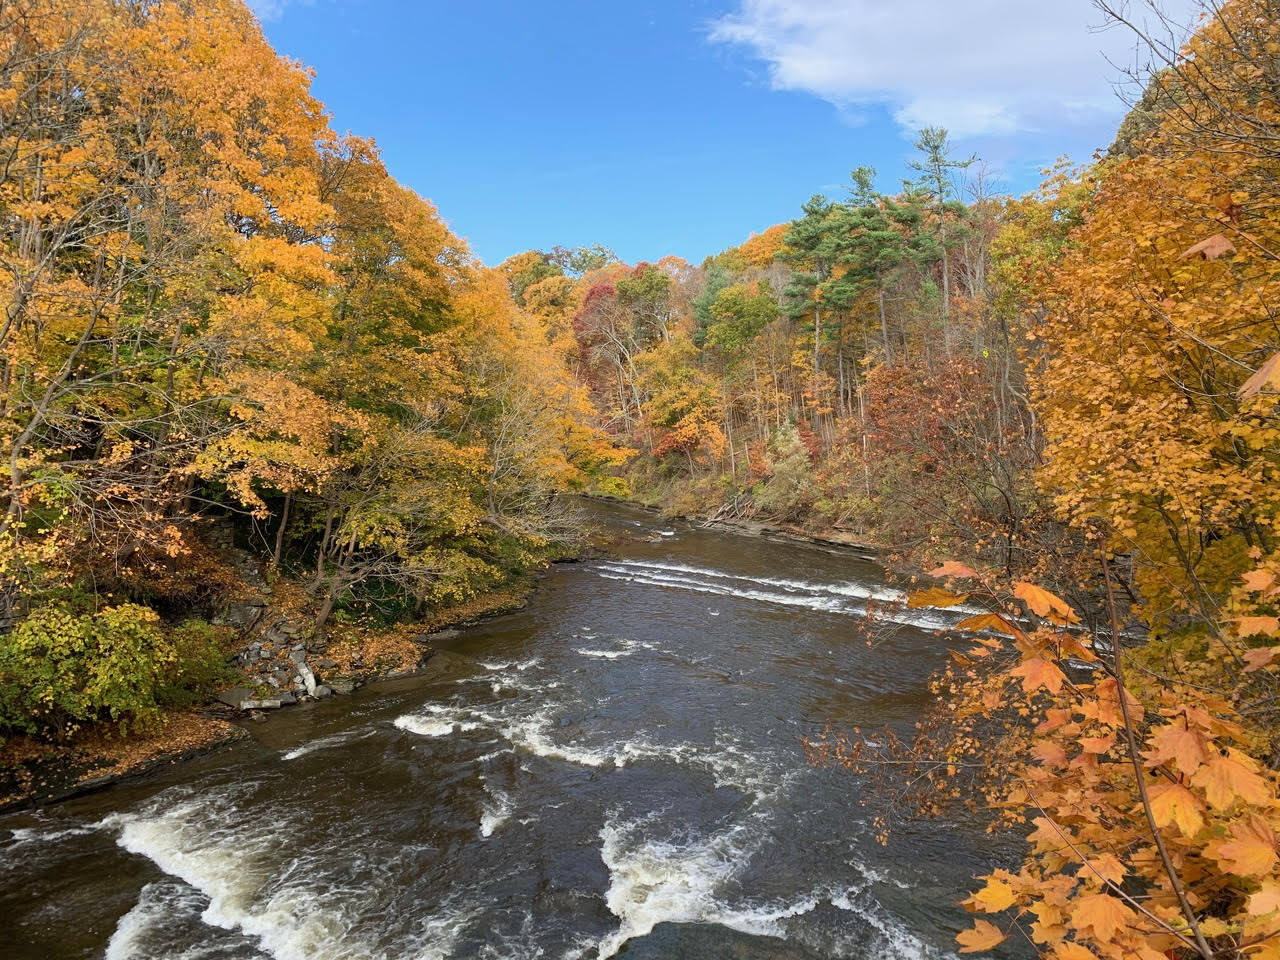 Falls in shallow creek, surrounded by trees in fall colors.